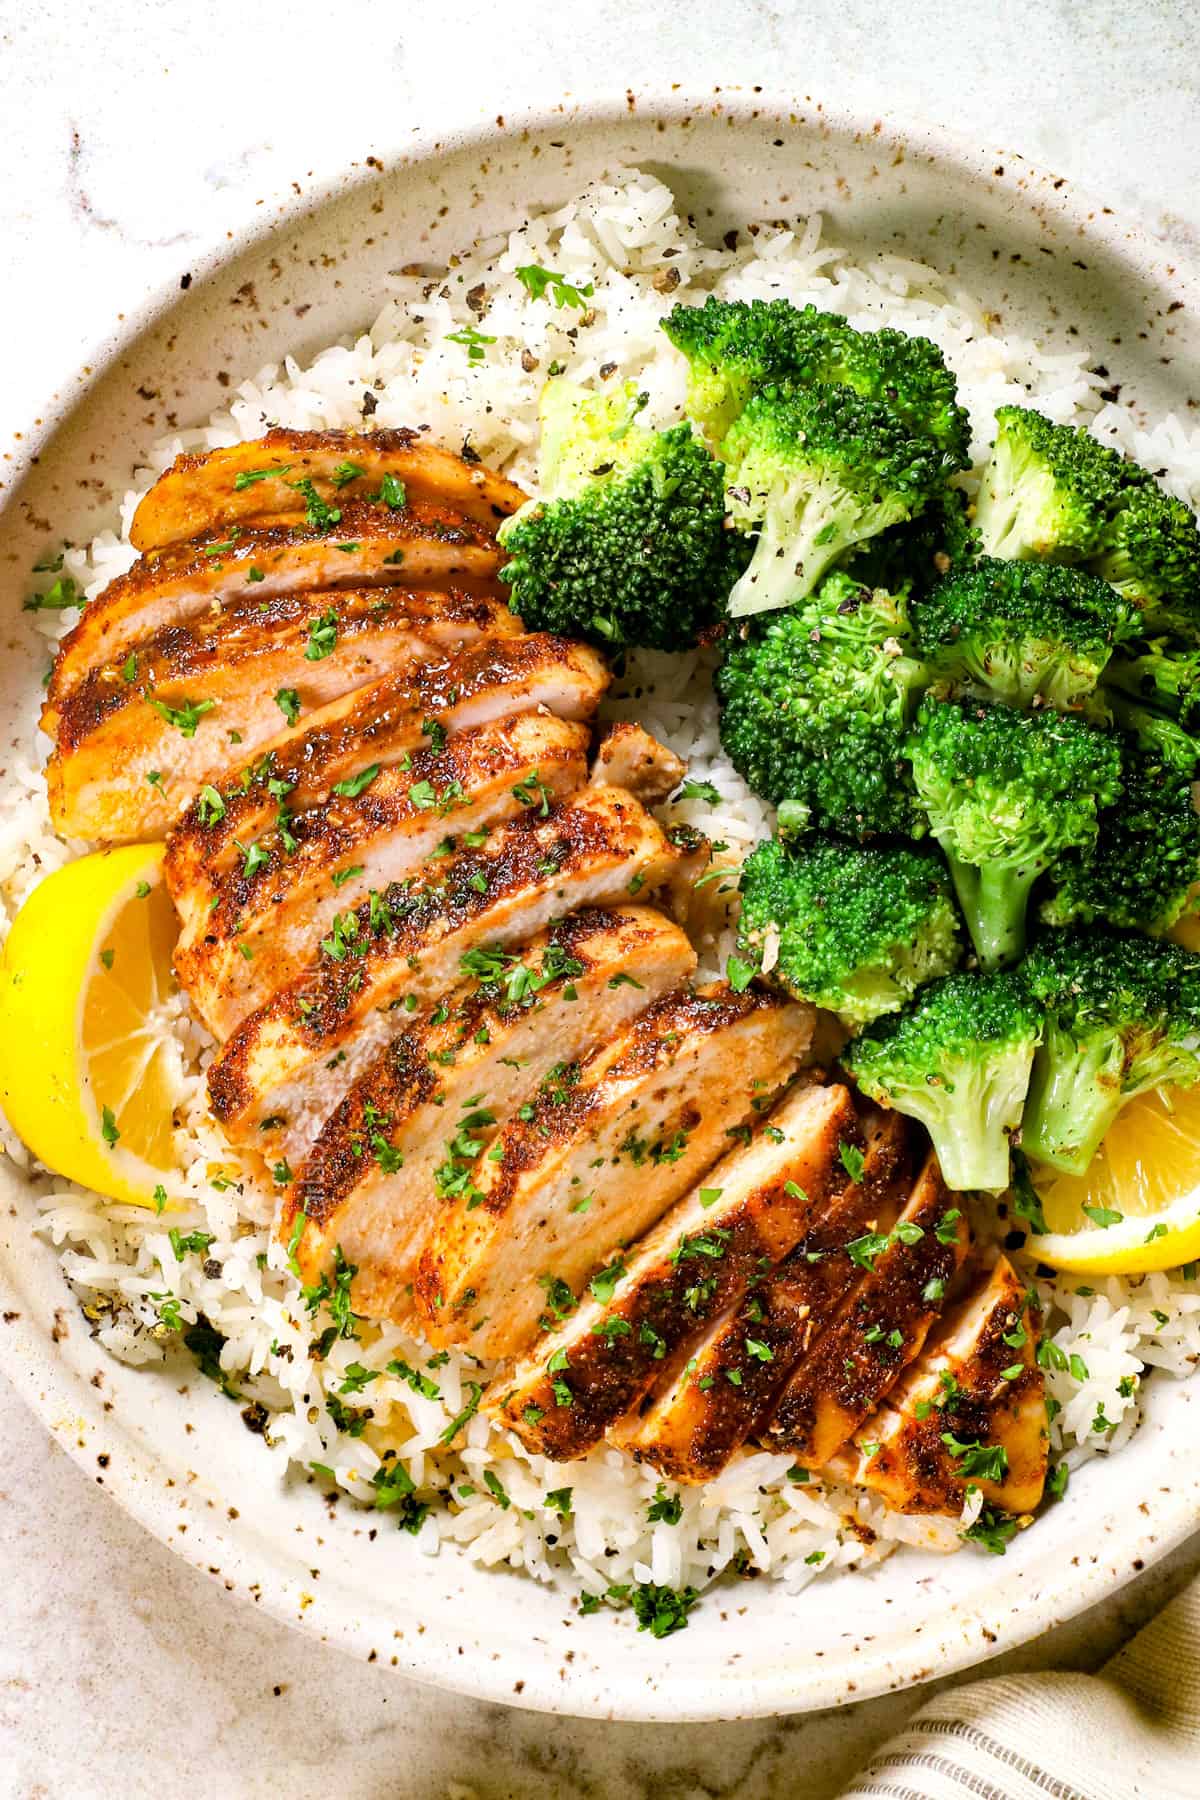 top view of baked boneless chicken breast served in a bowl with broccoli